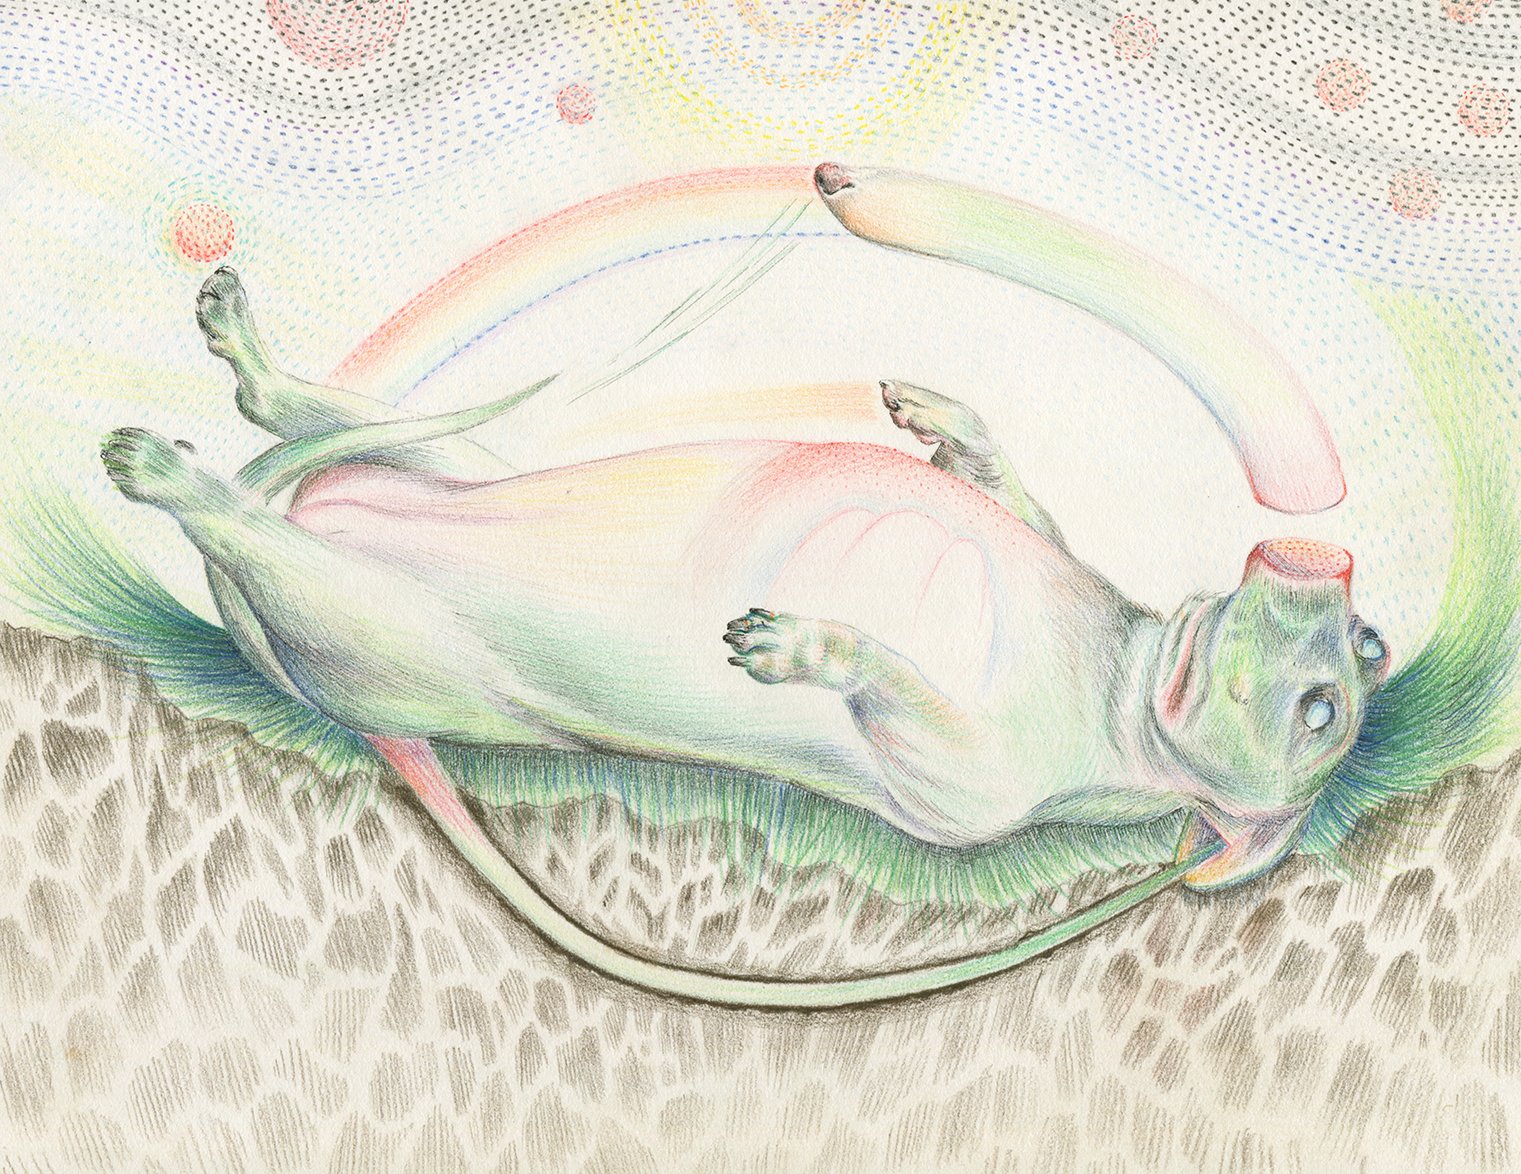  “In Submission to the Unknown, Playing Dead”, Ink and colored pencil on paper, 11x14”, 2020. 